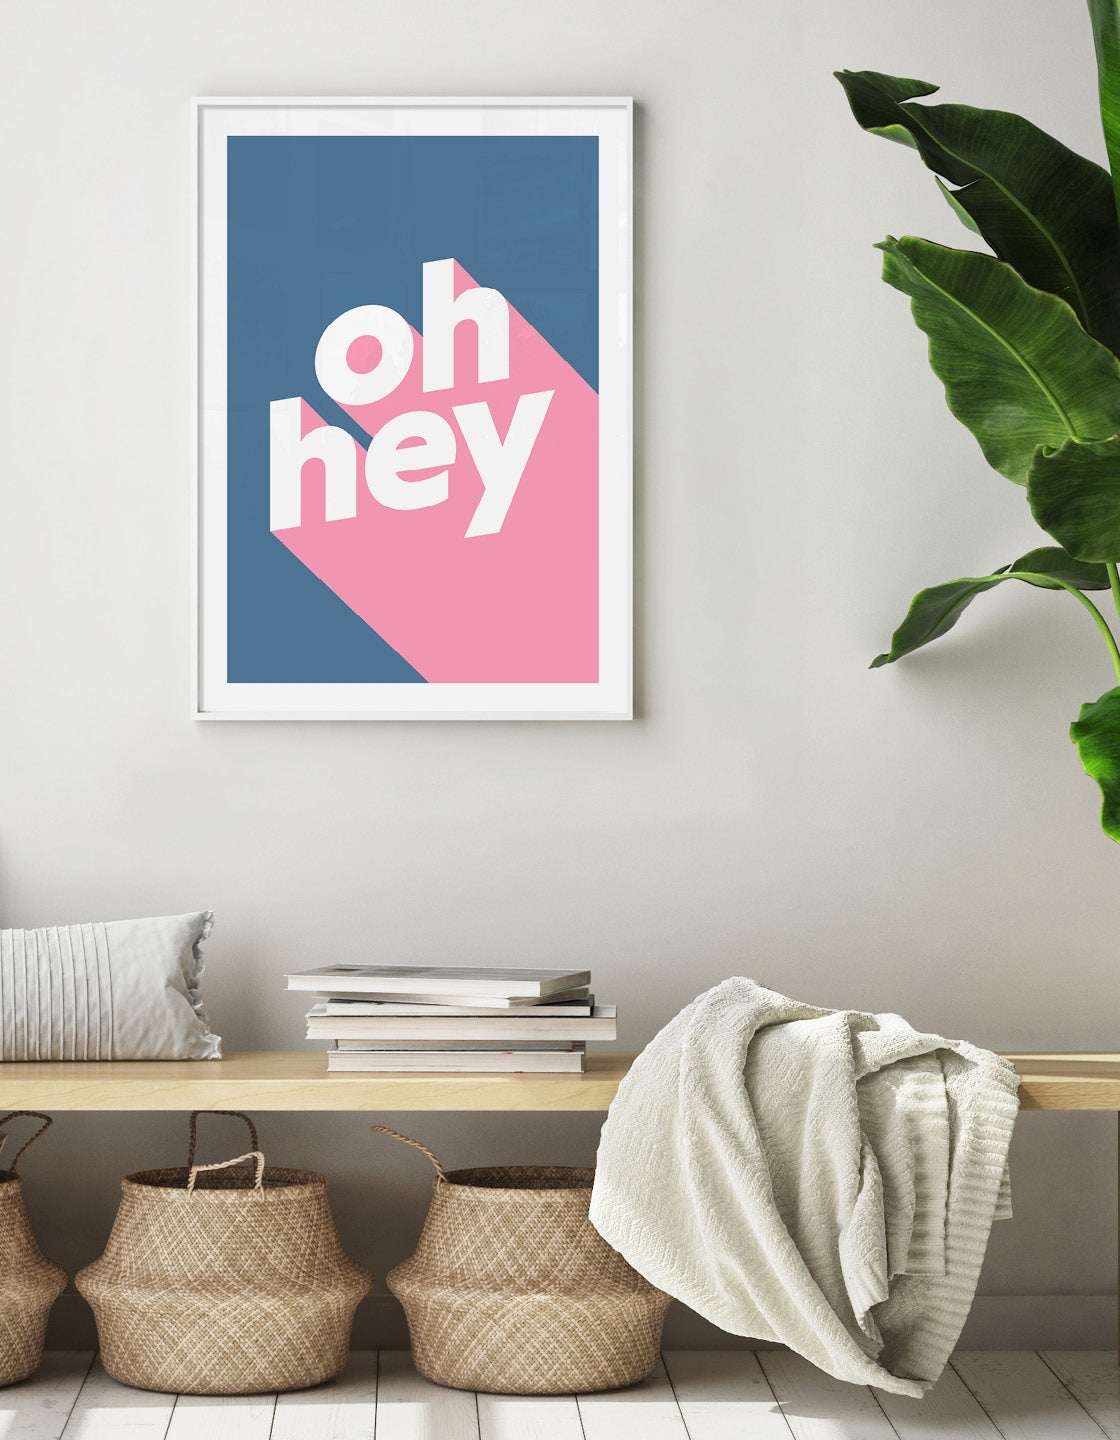 modern typography print with the words oh hey in lowercase type in white on pink against a blue background